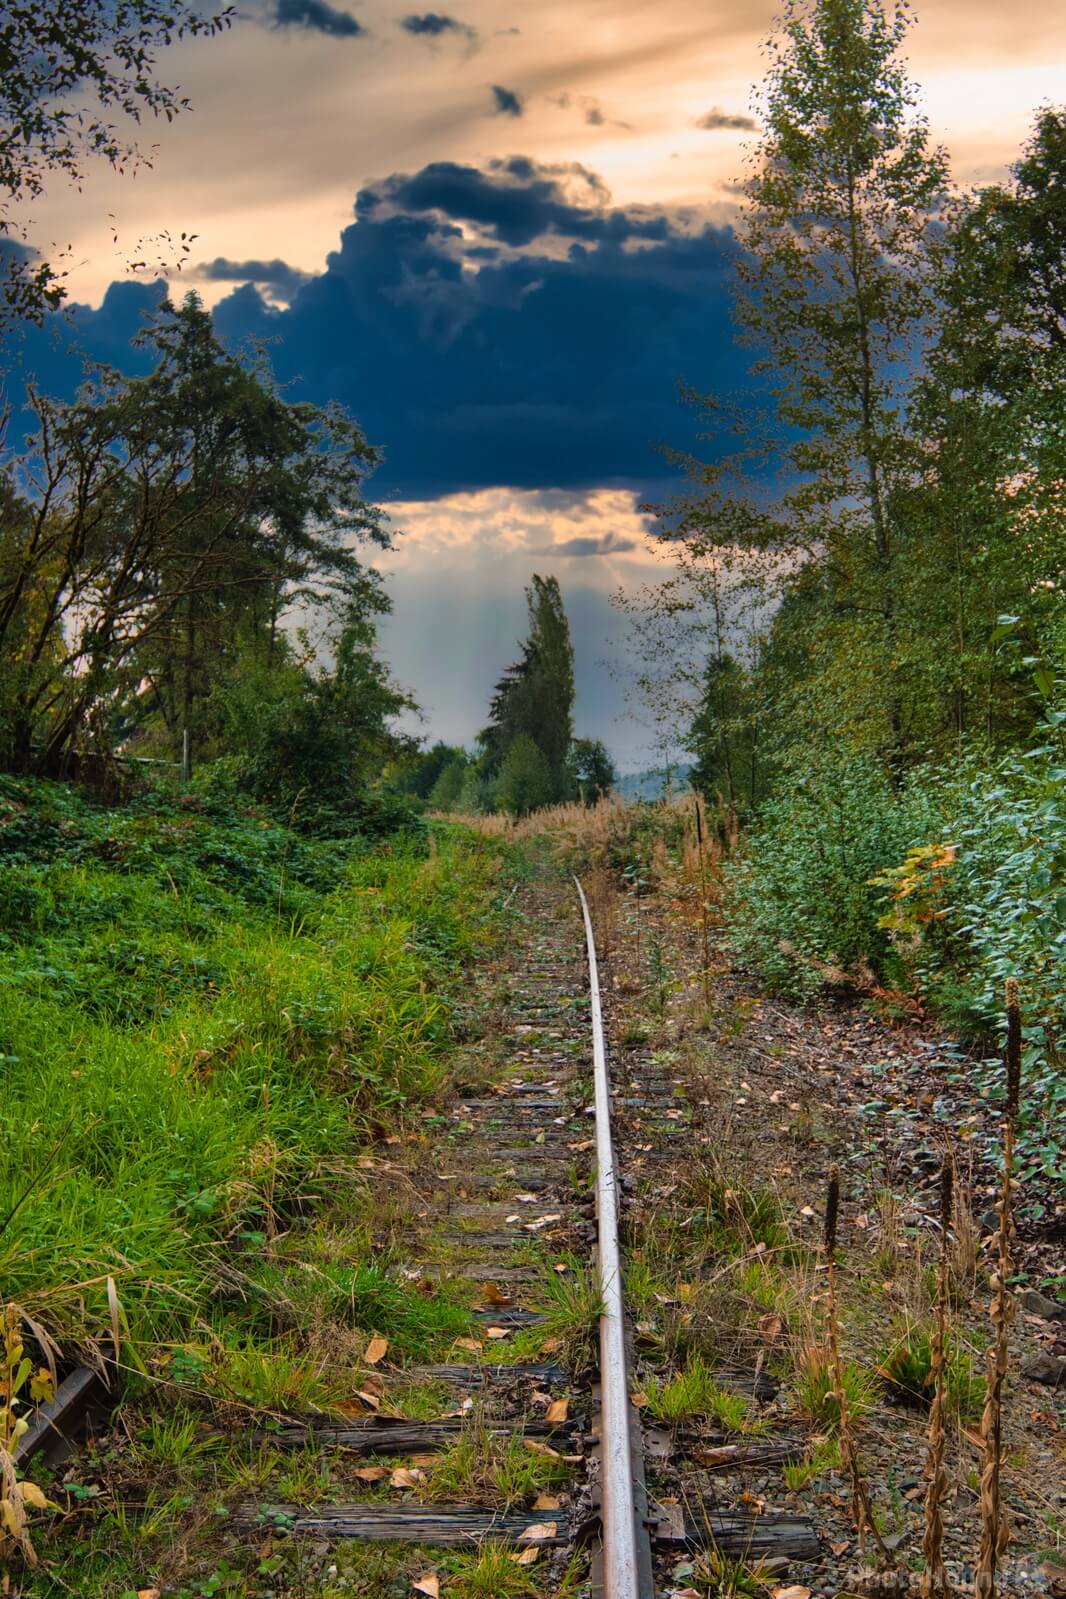 Image of Abandoned Railroad Tracks Clearview, WA by Steve West